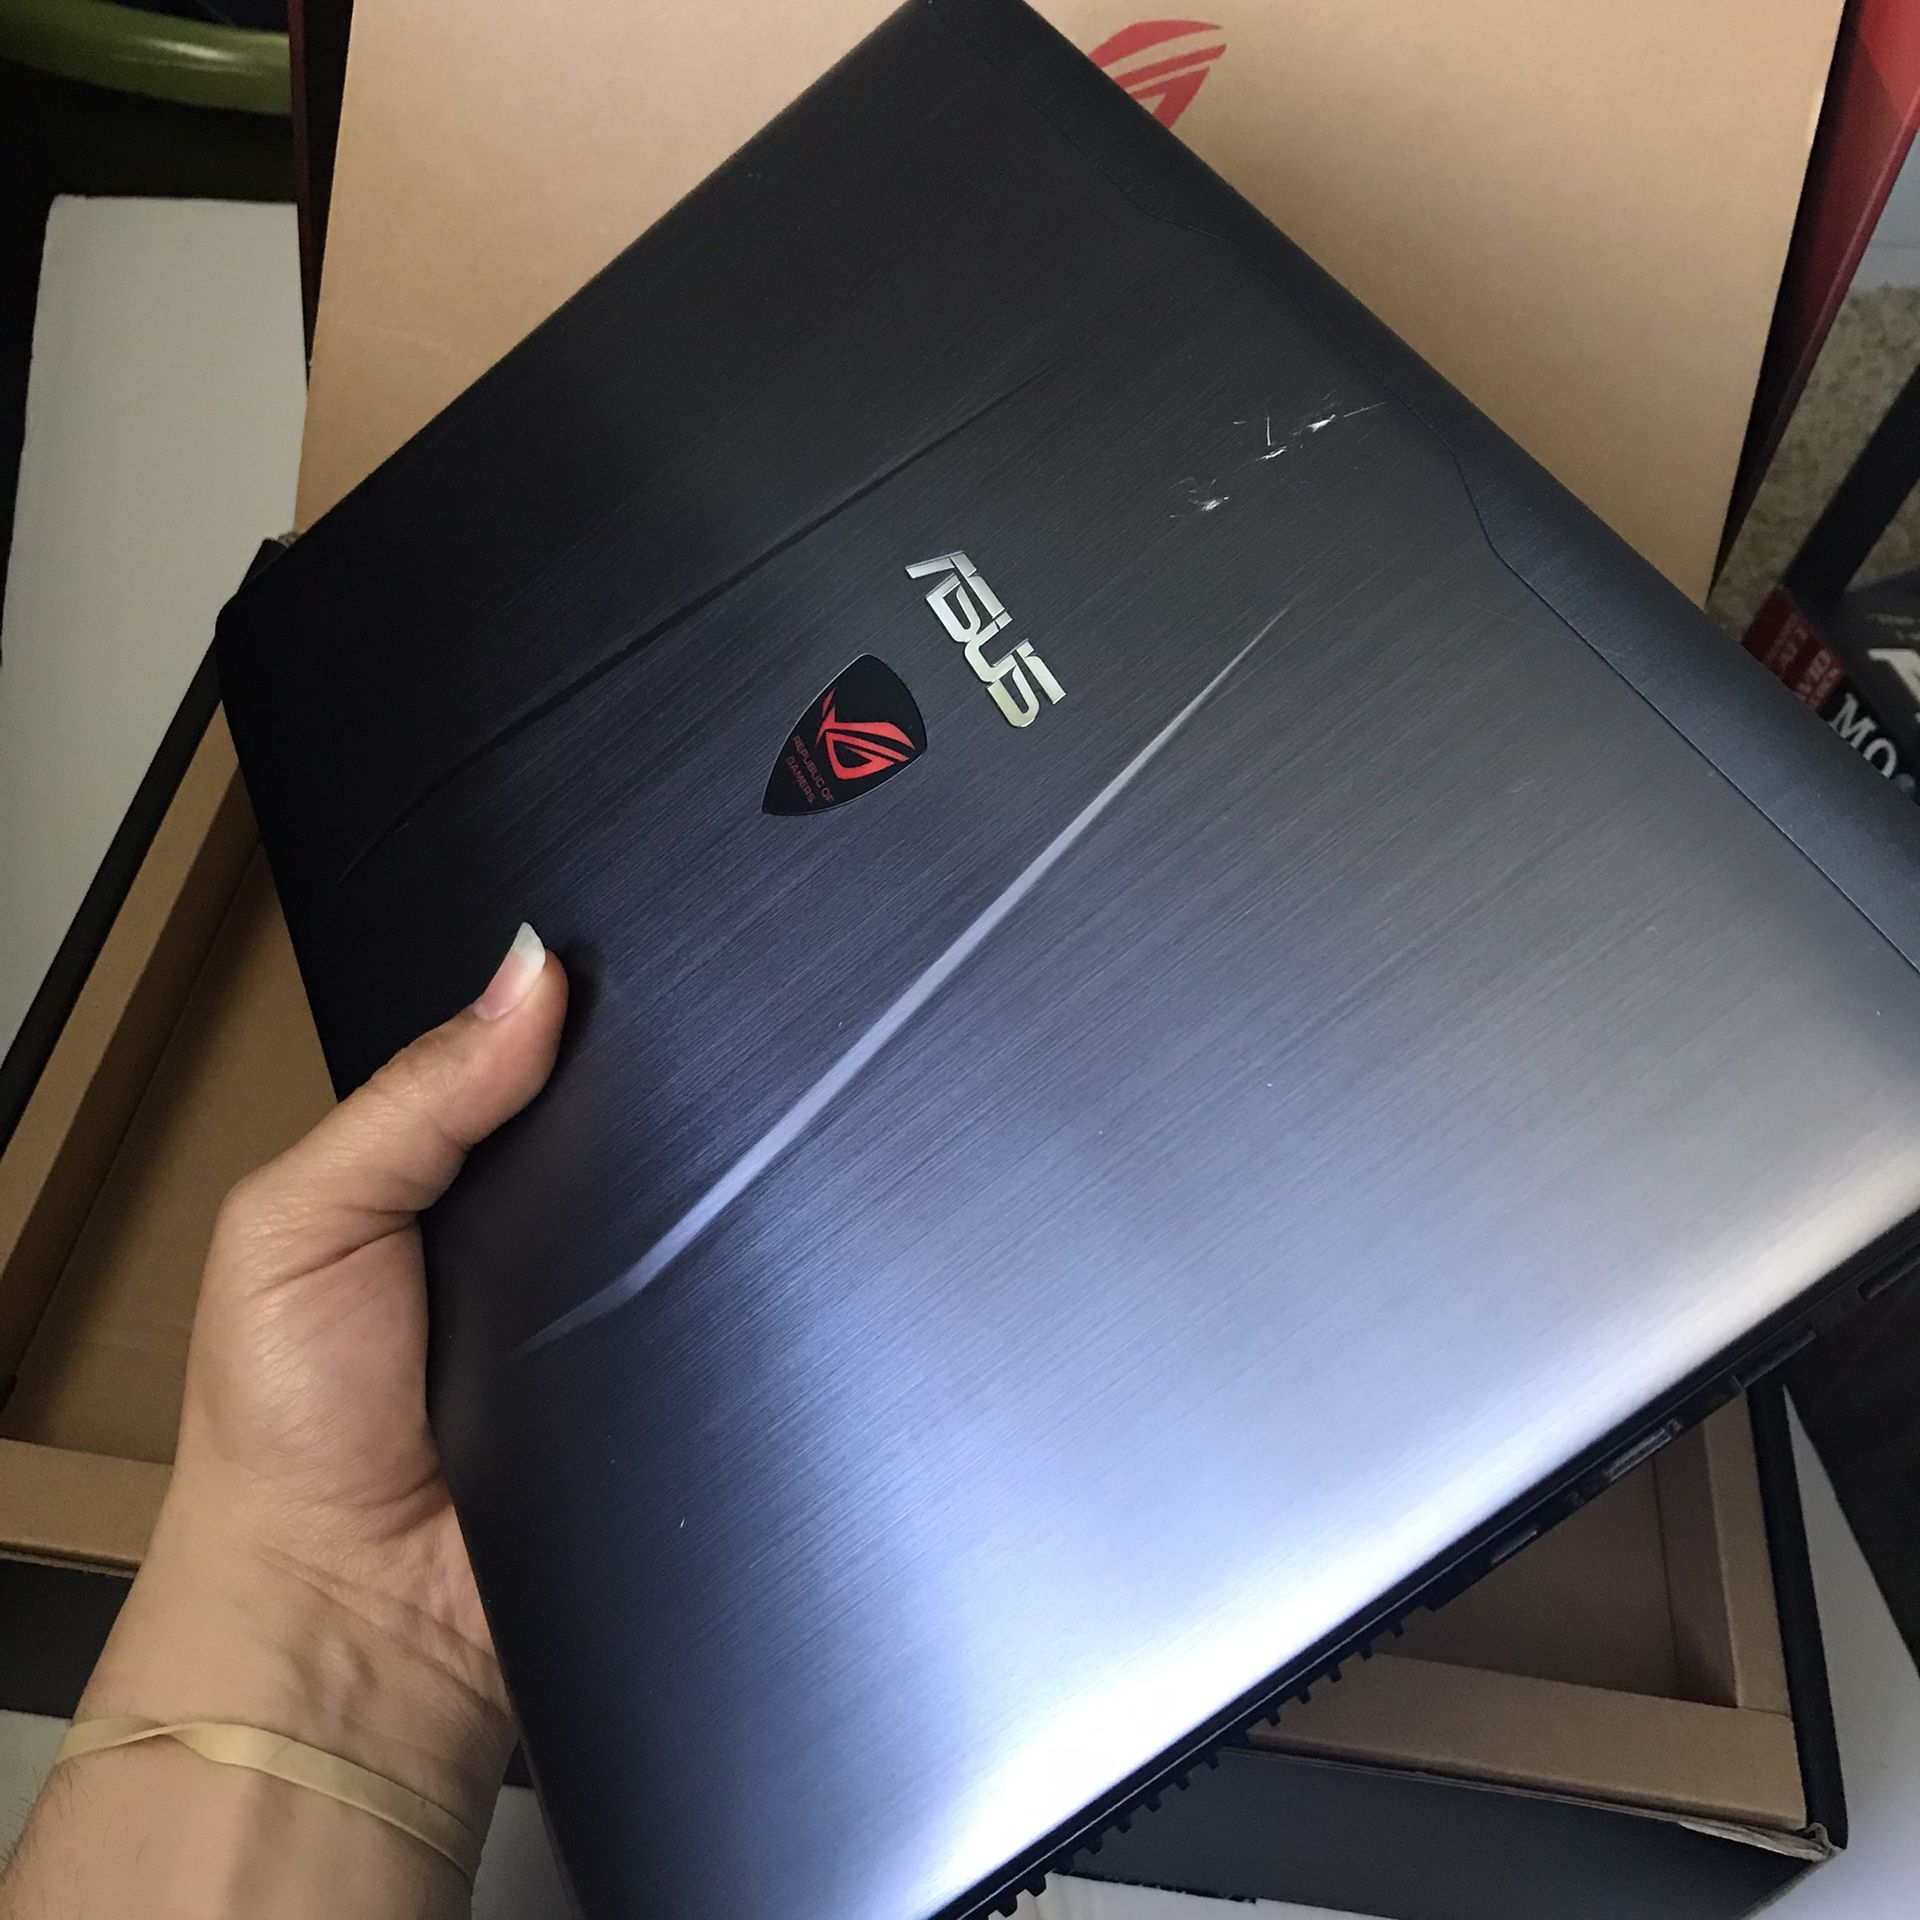 EXCELLENT in BOX // 15.6" ASUS Gaming Laptop -FHD AntiGlare - i7-6700HQ 2.6Ghz (8 CPUS) - 128GB Samsung SSD + 1 TB HDD + 16GB DDR4 Ram - NVIDIA GeFor